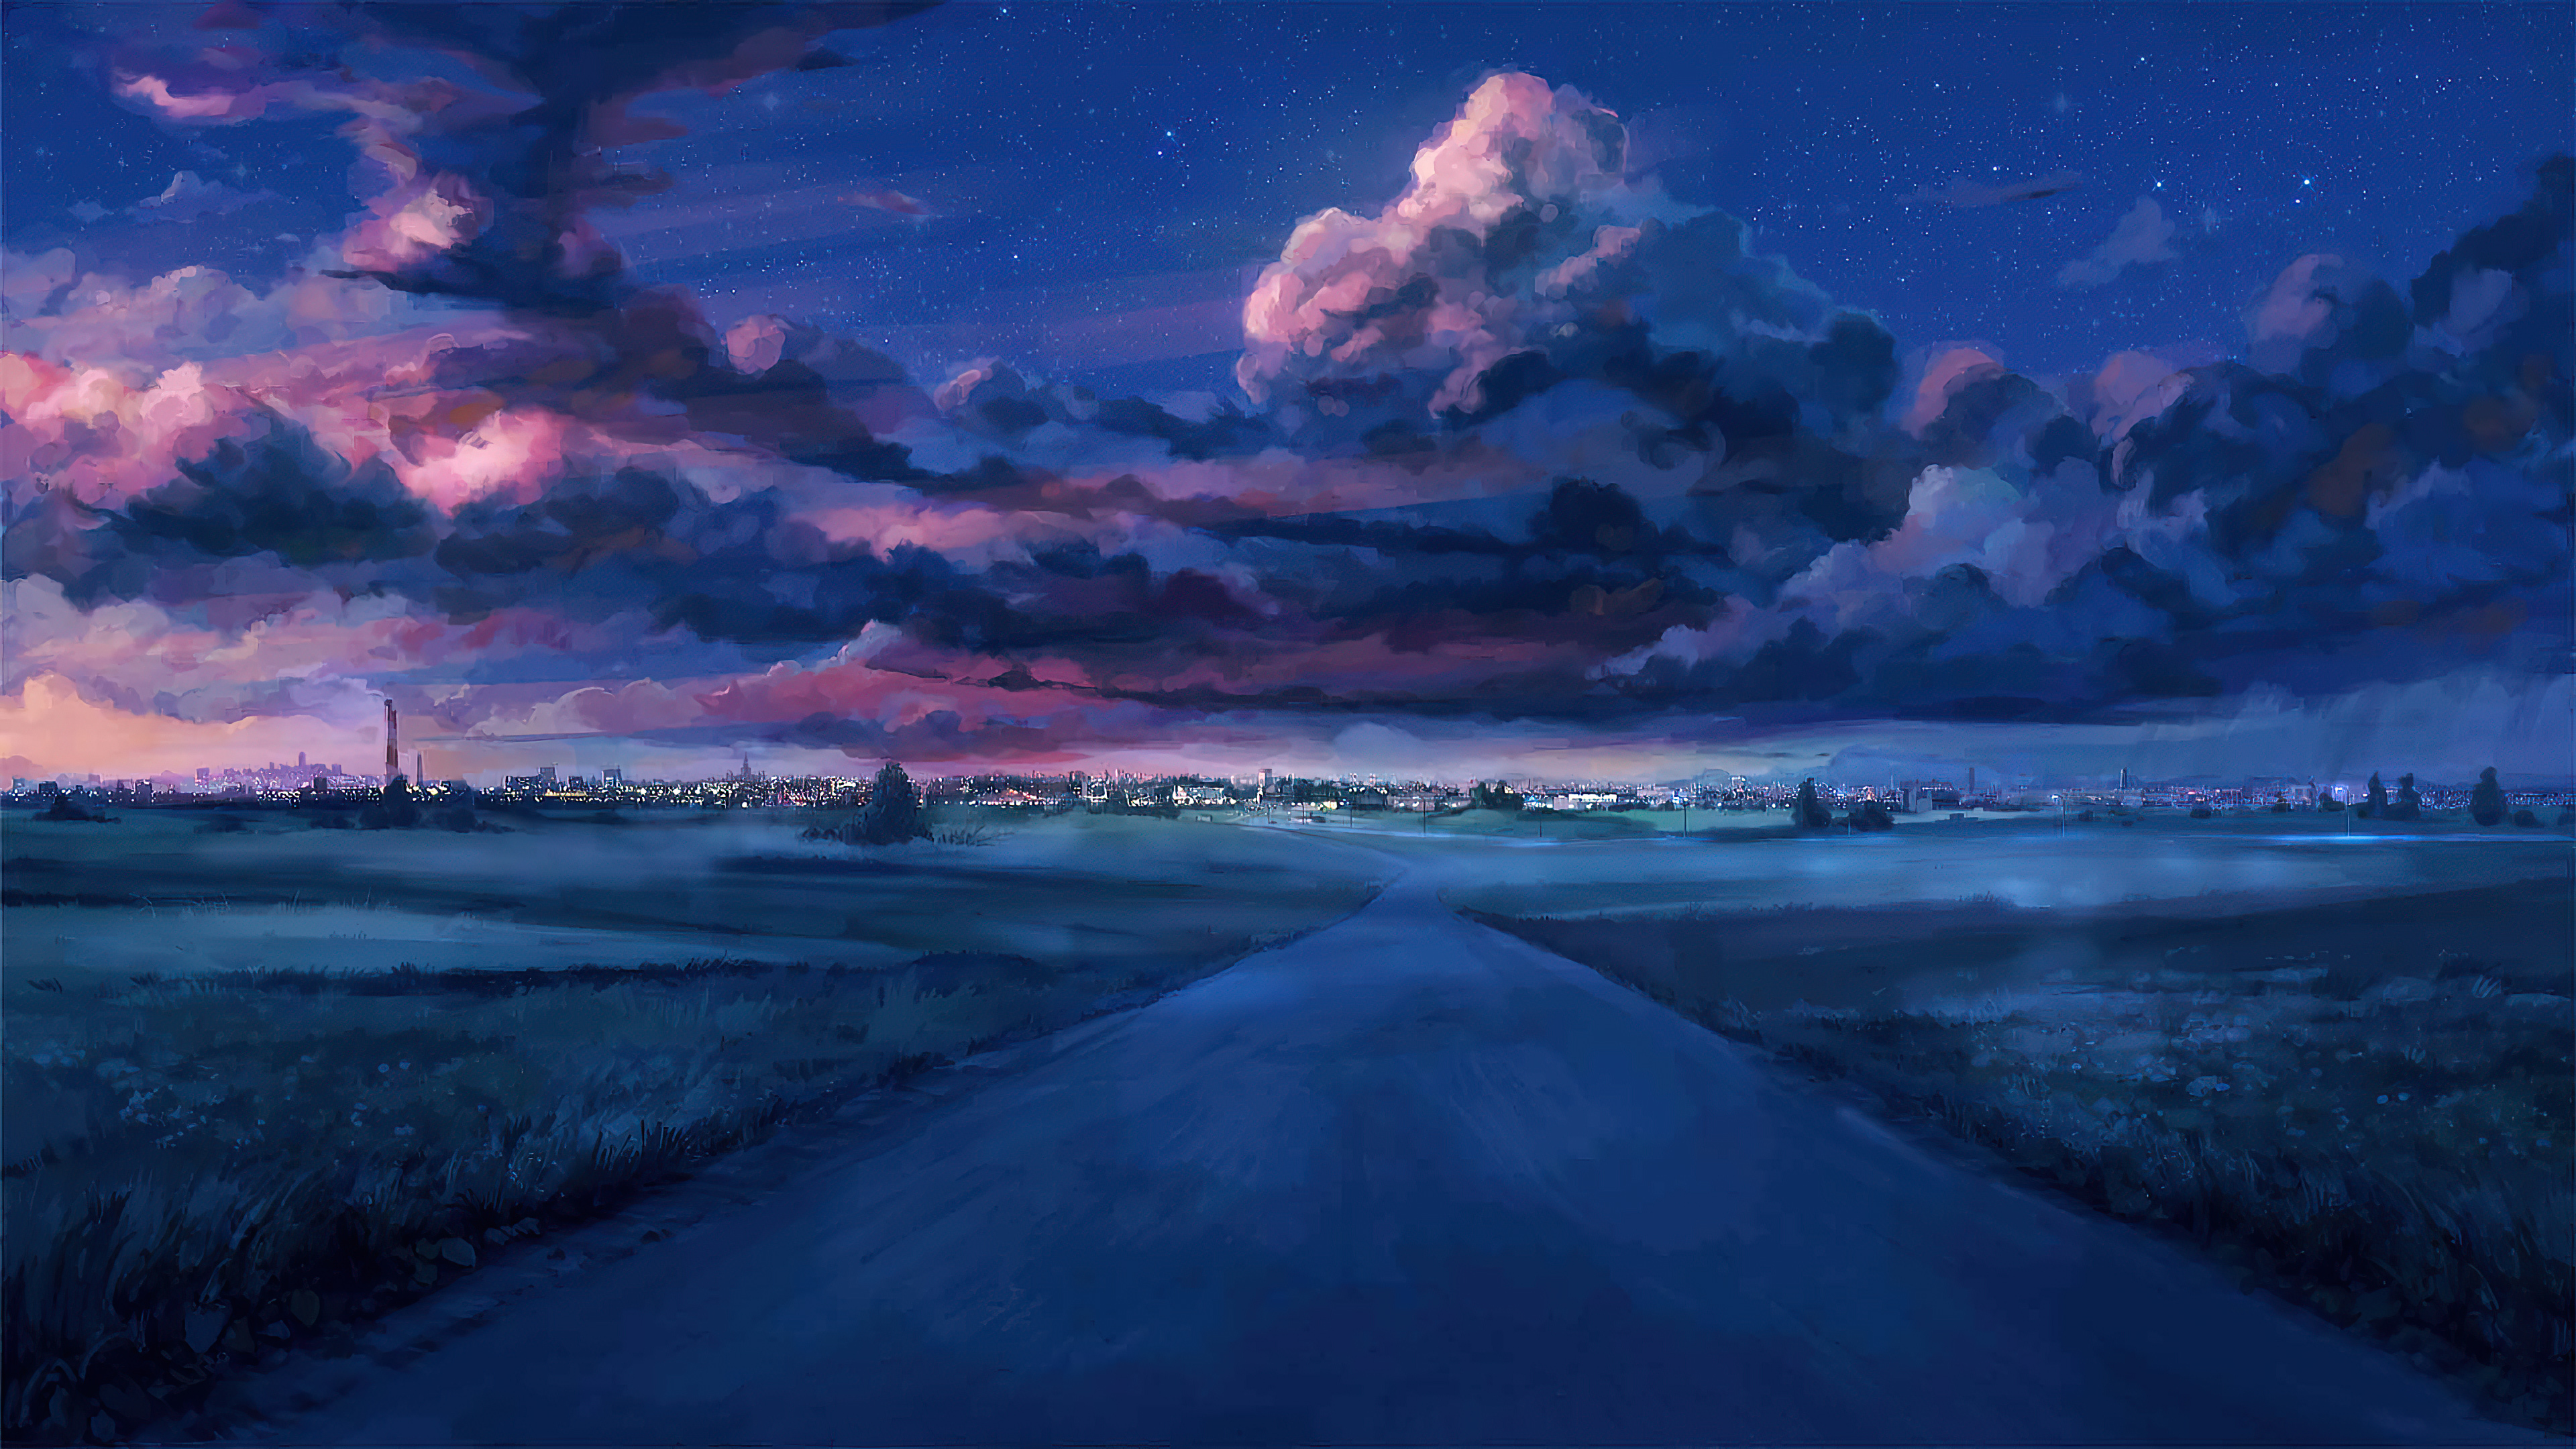 3840x2160 Anime Road To City Everlasting Summer 4k 4k Hd 4k Wallpapers